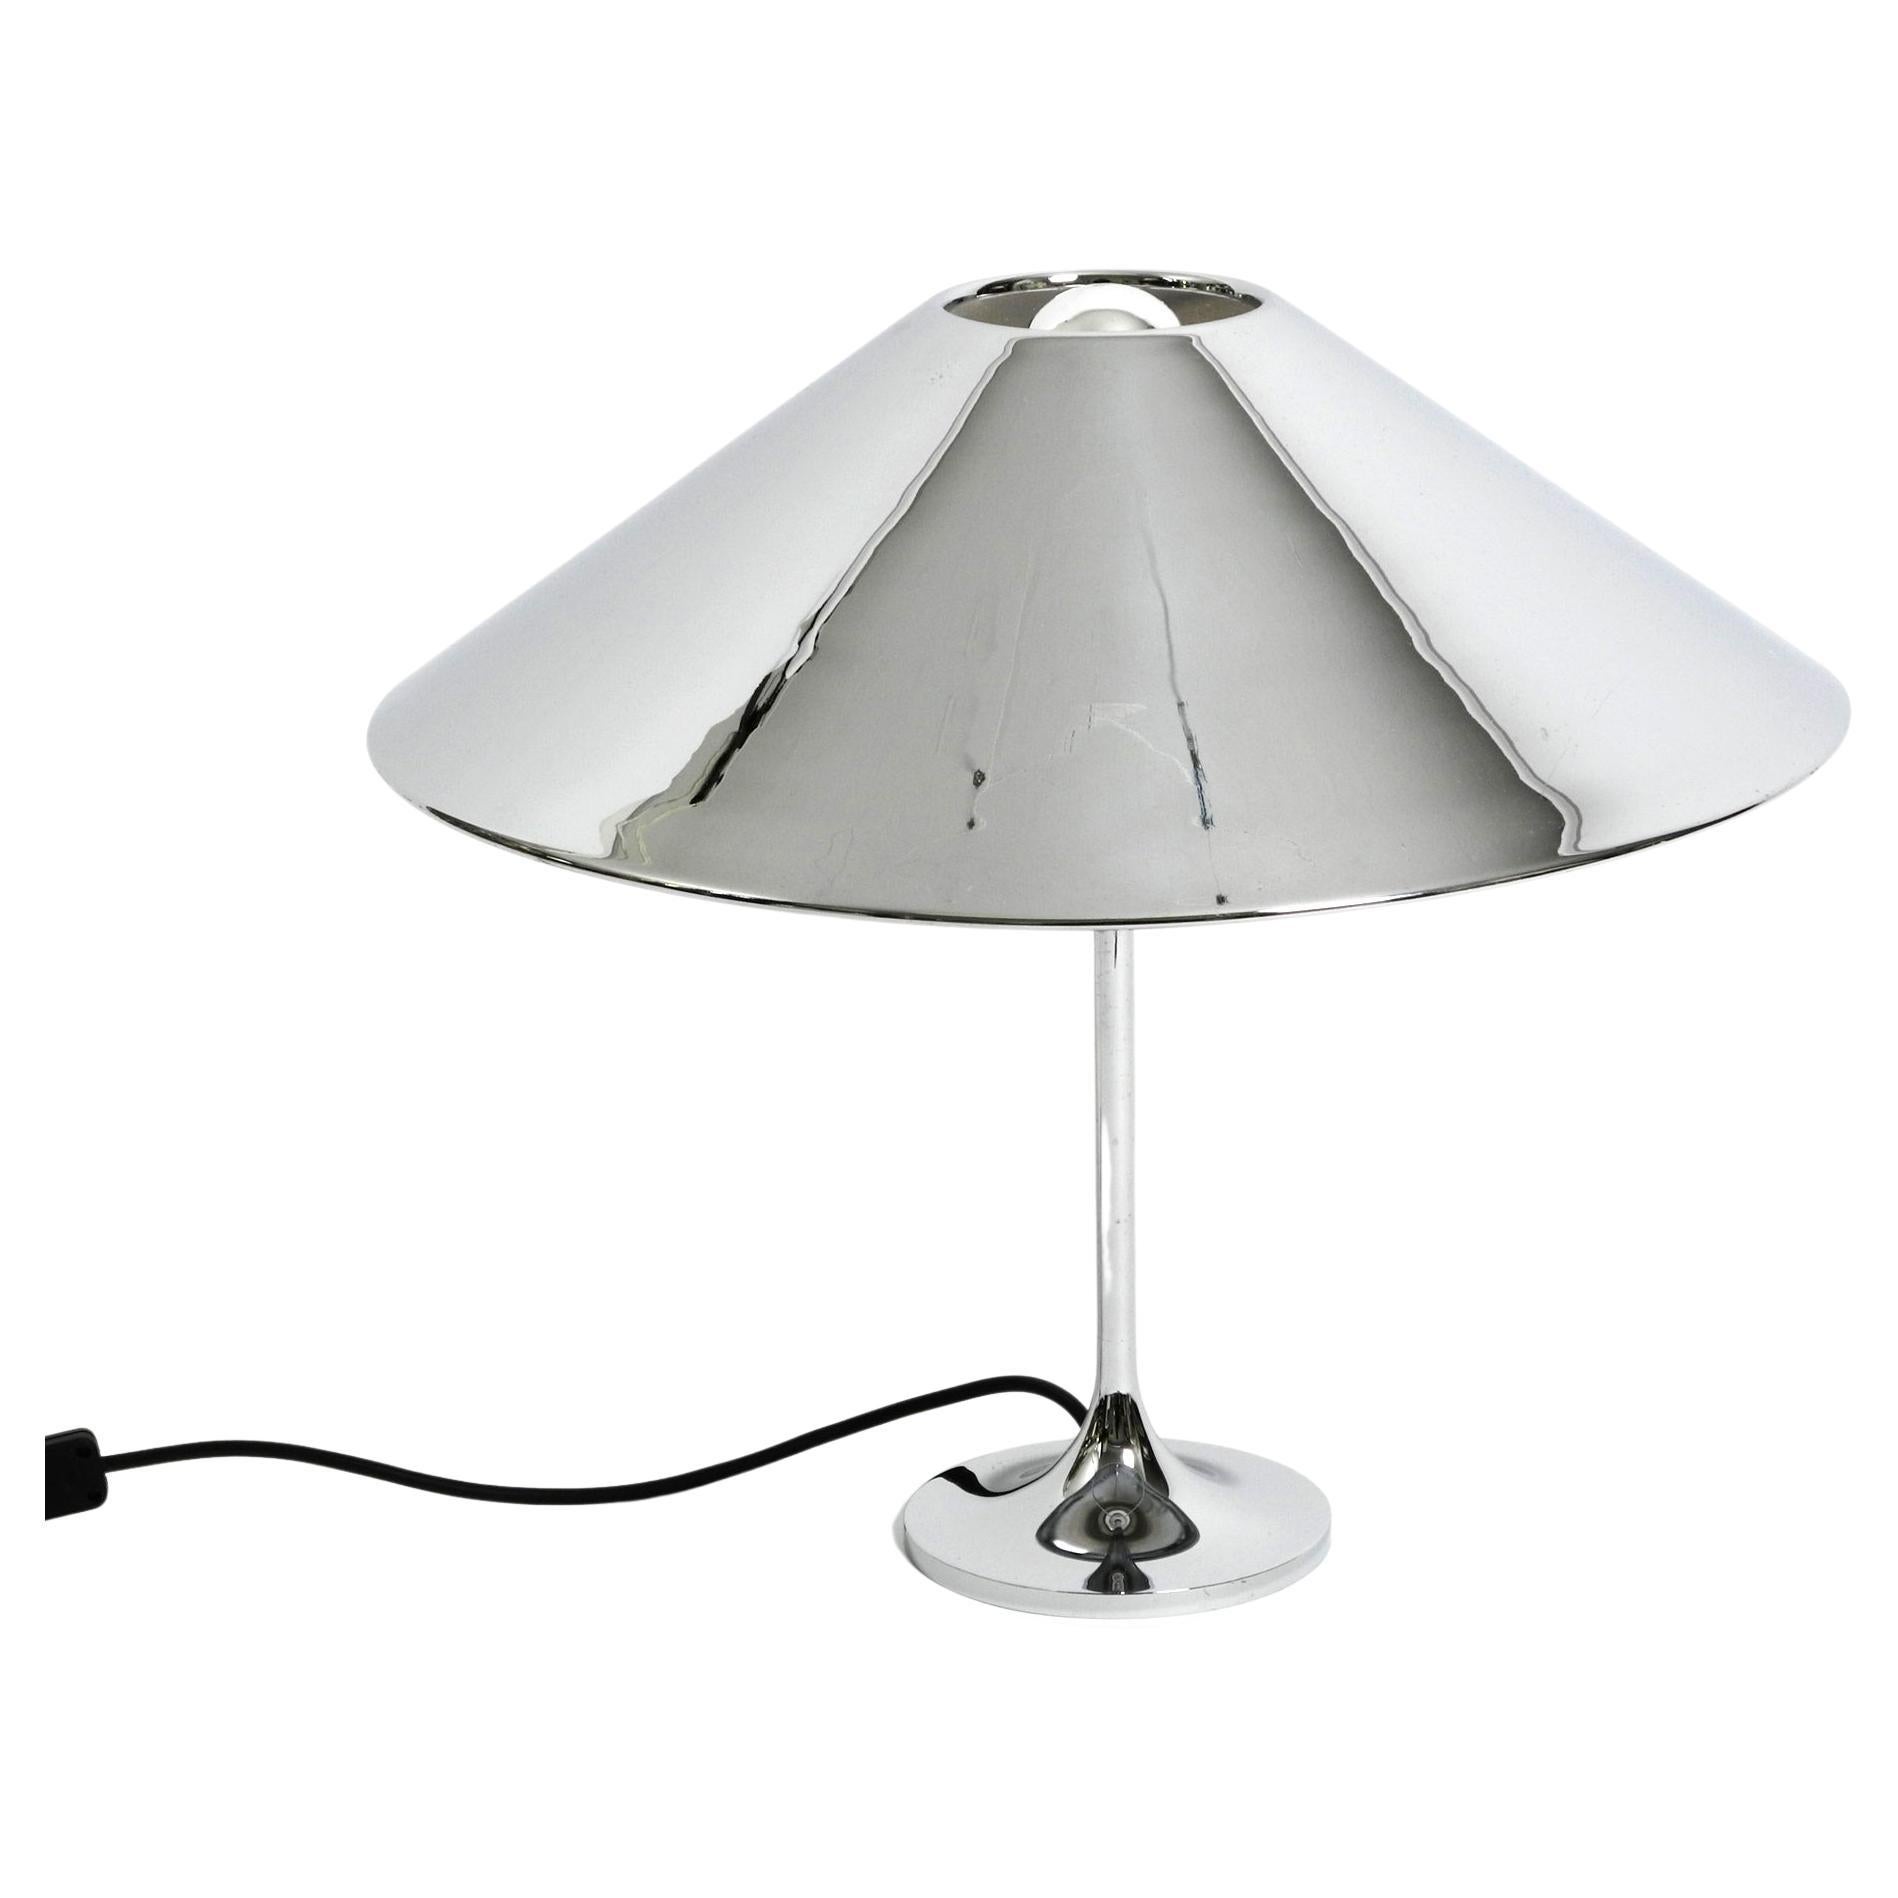 Large, Heavy 70s Metal Chrome Table Lamp with a Metal Shade in a Classic  Design For Sale at 1stDibs | chrome lamp shade, lamps from the 70s, chrome  lamp shades